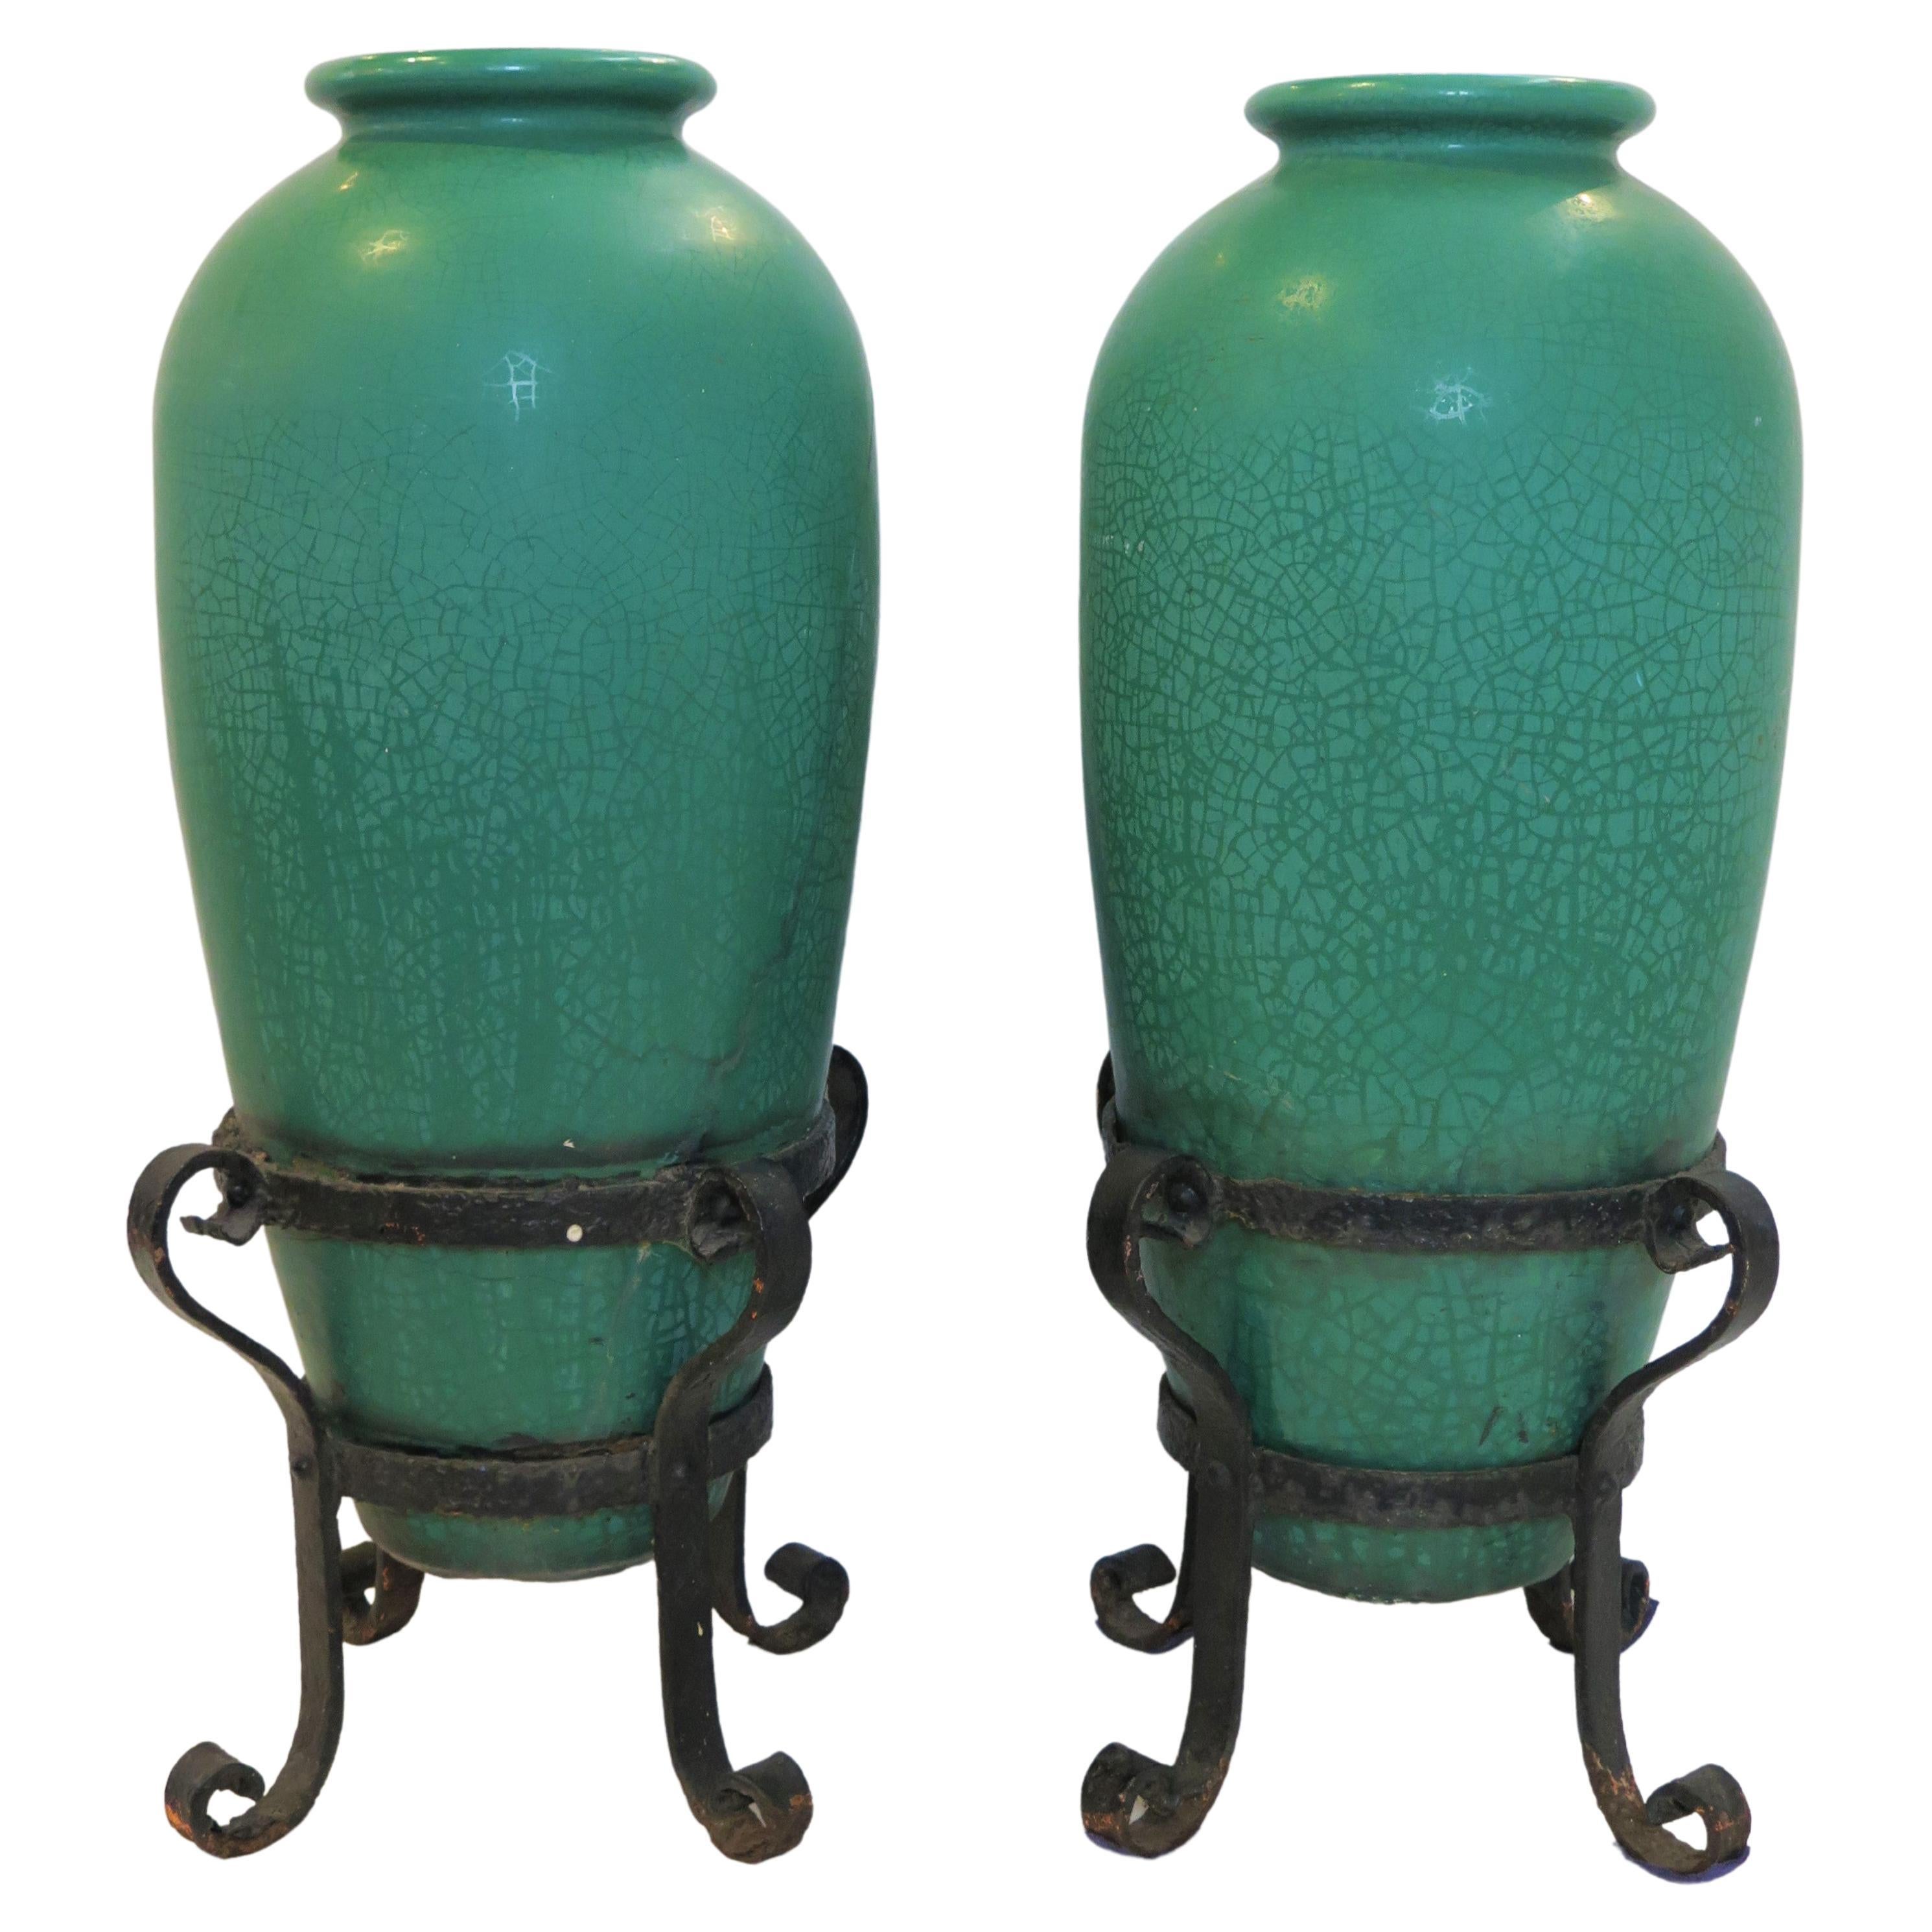 A Pair of Galloway Pottery Crackled Glaze Urns with Iron Stands